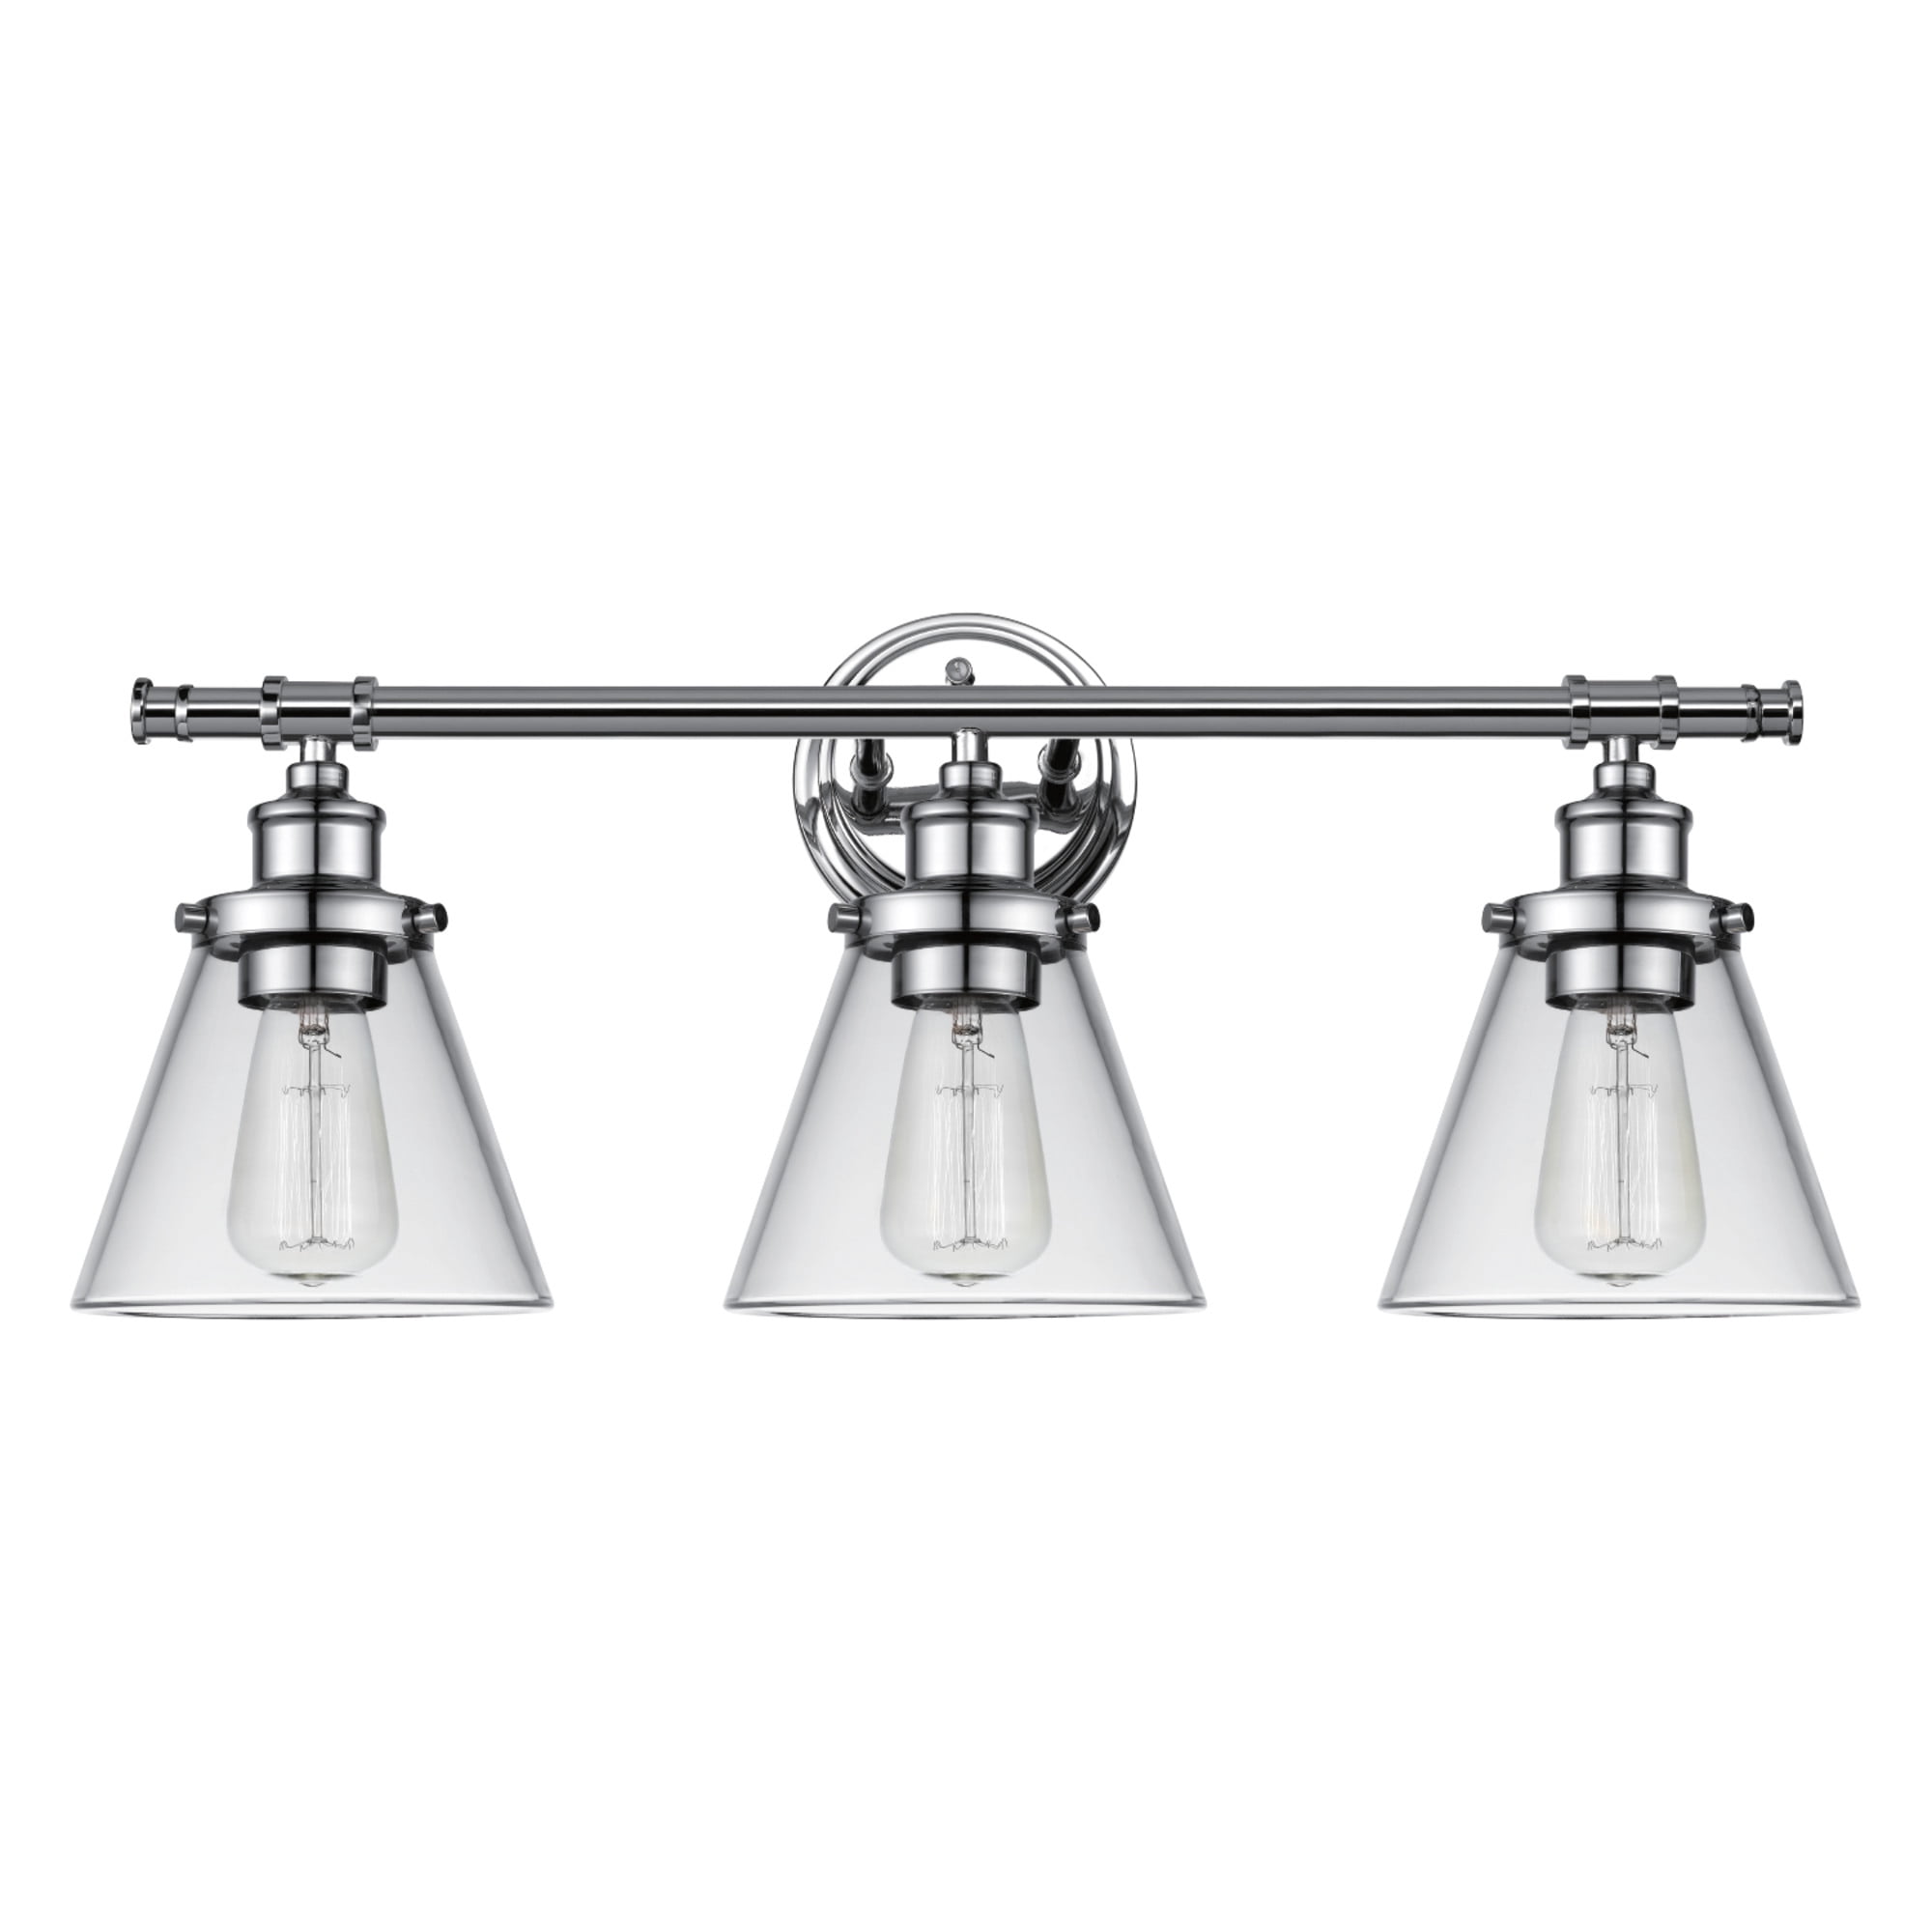 3-Light Chrome All-In-One Bath Light Vanity 5-Piece Rustic Classic Decor Pipe 